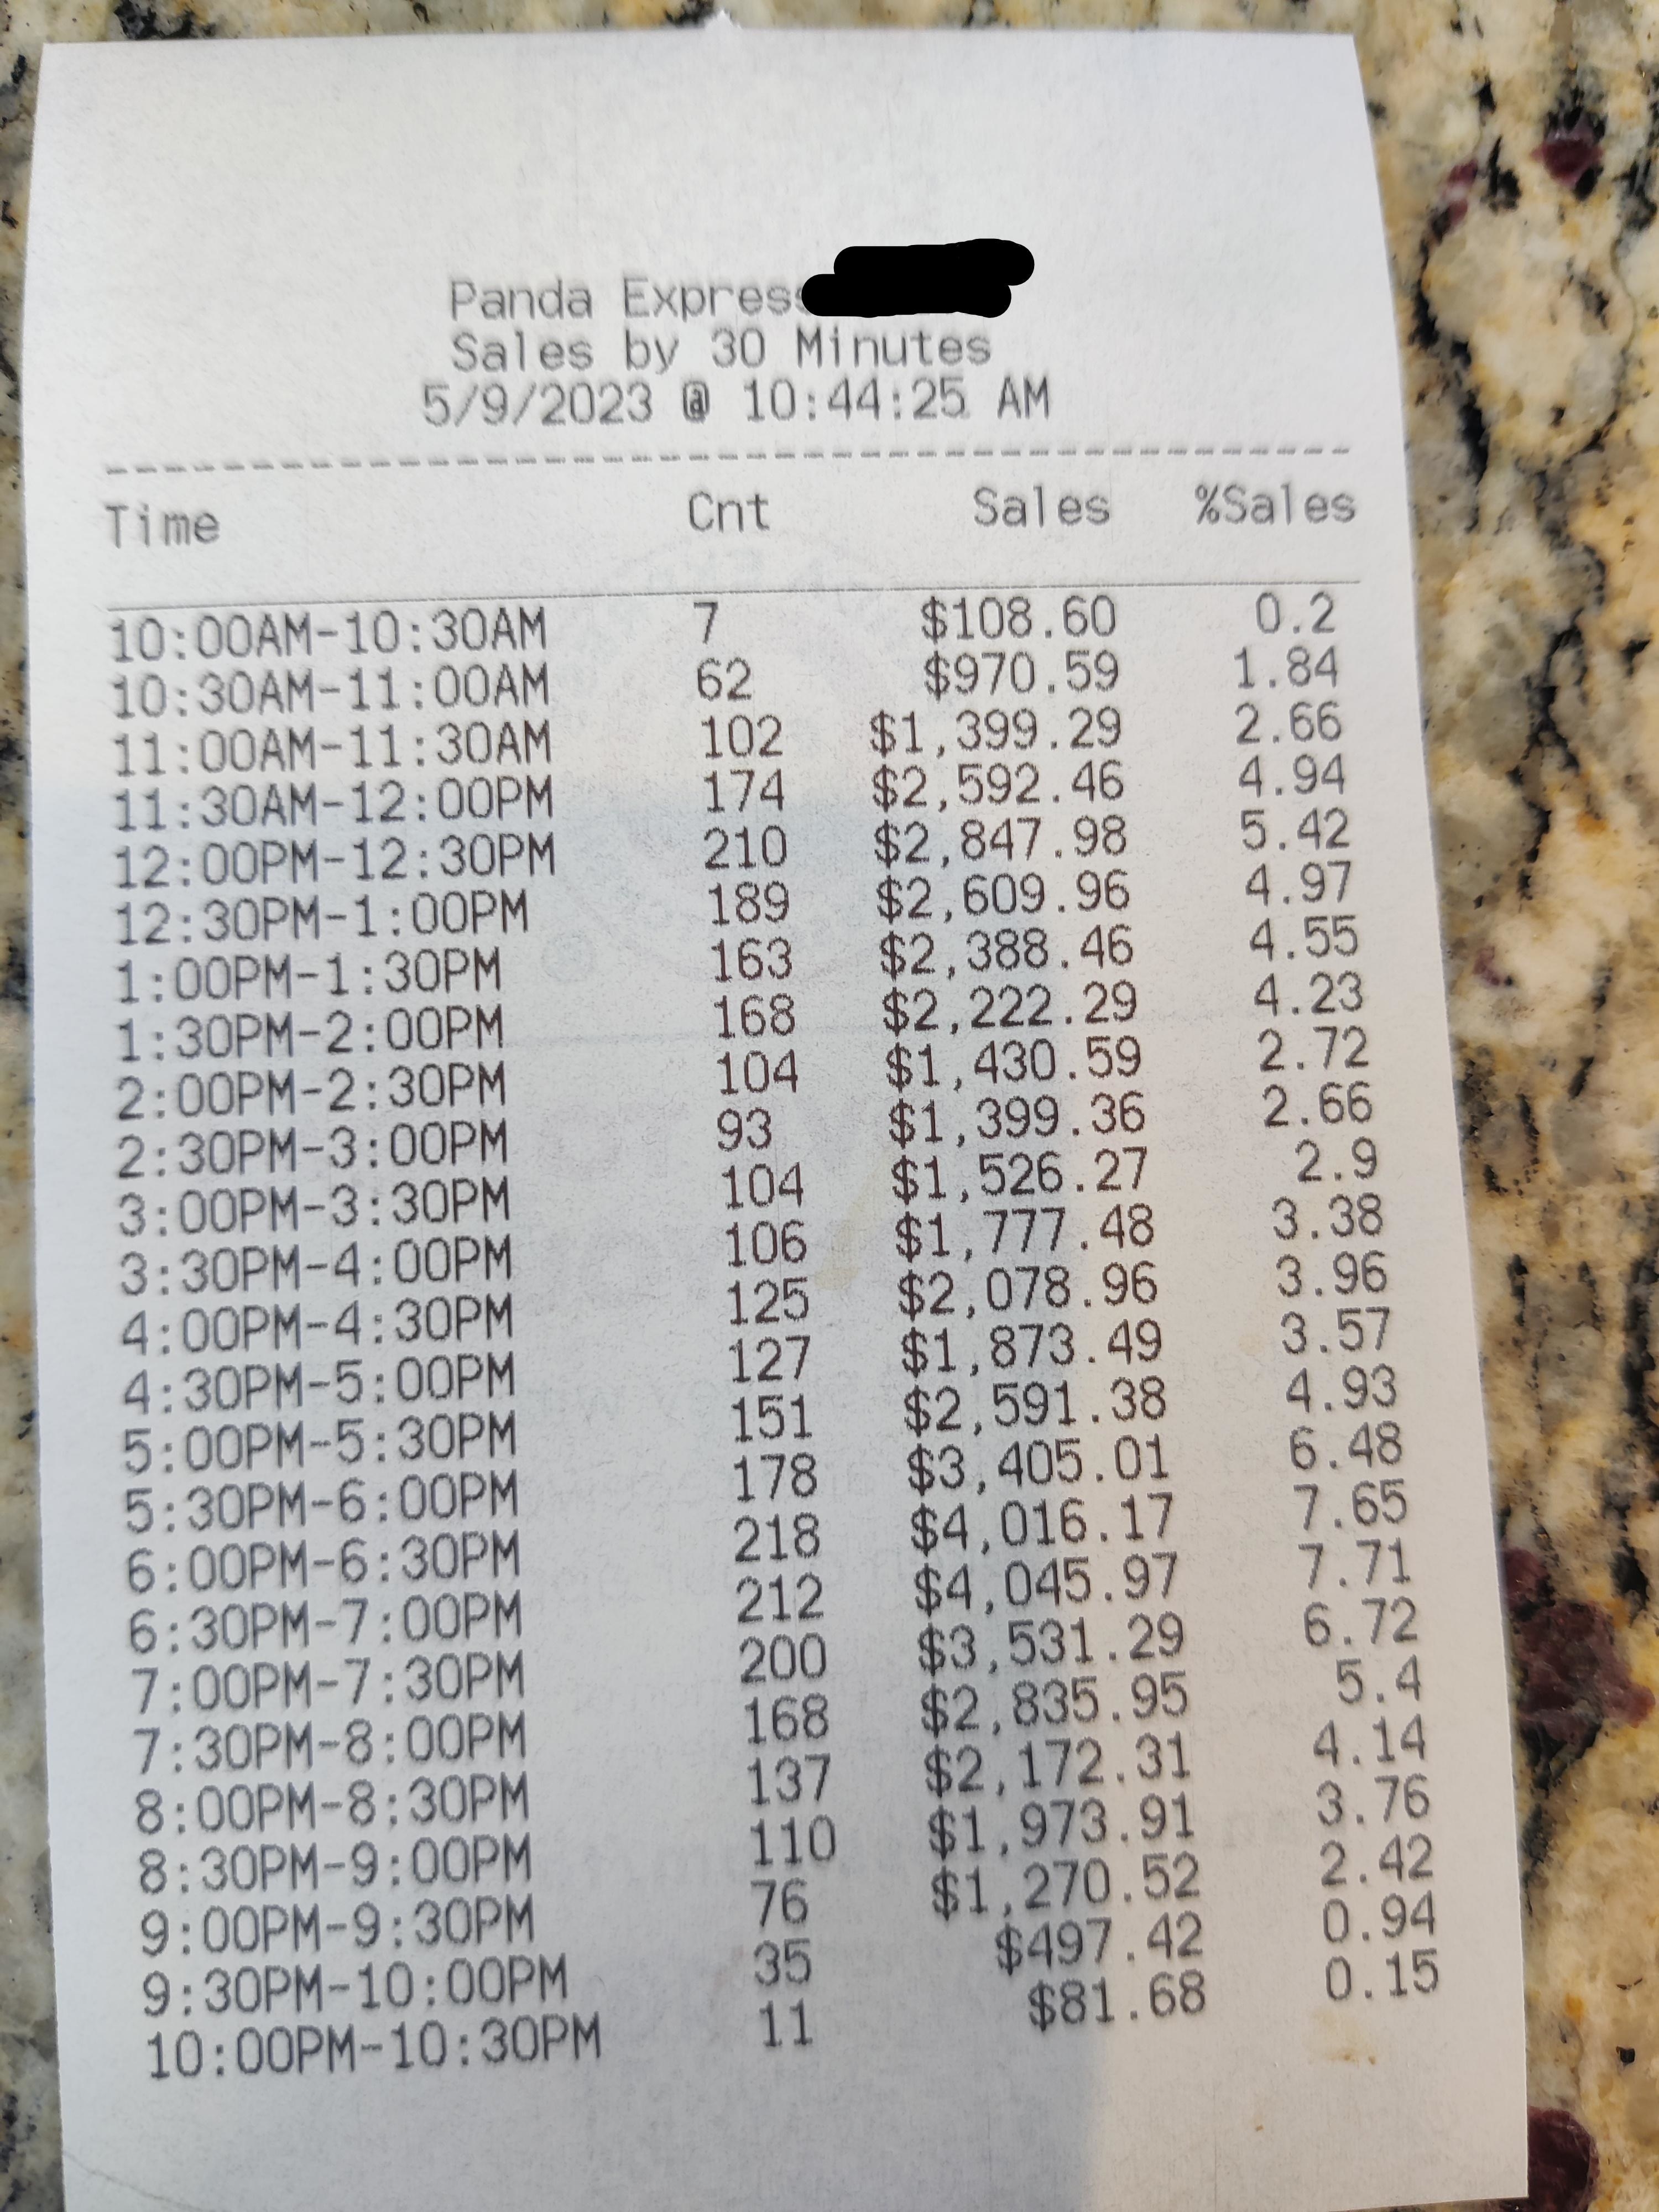 A long receipt with time frames throughout the day showing thousands of dollars earned